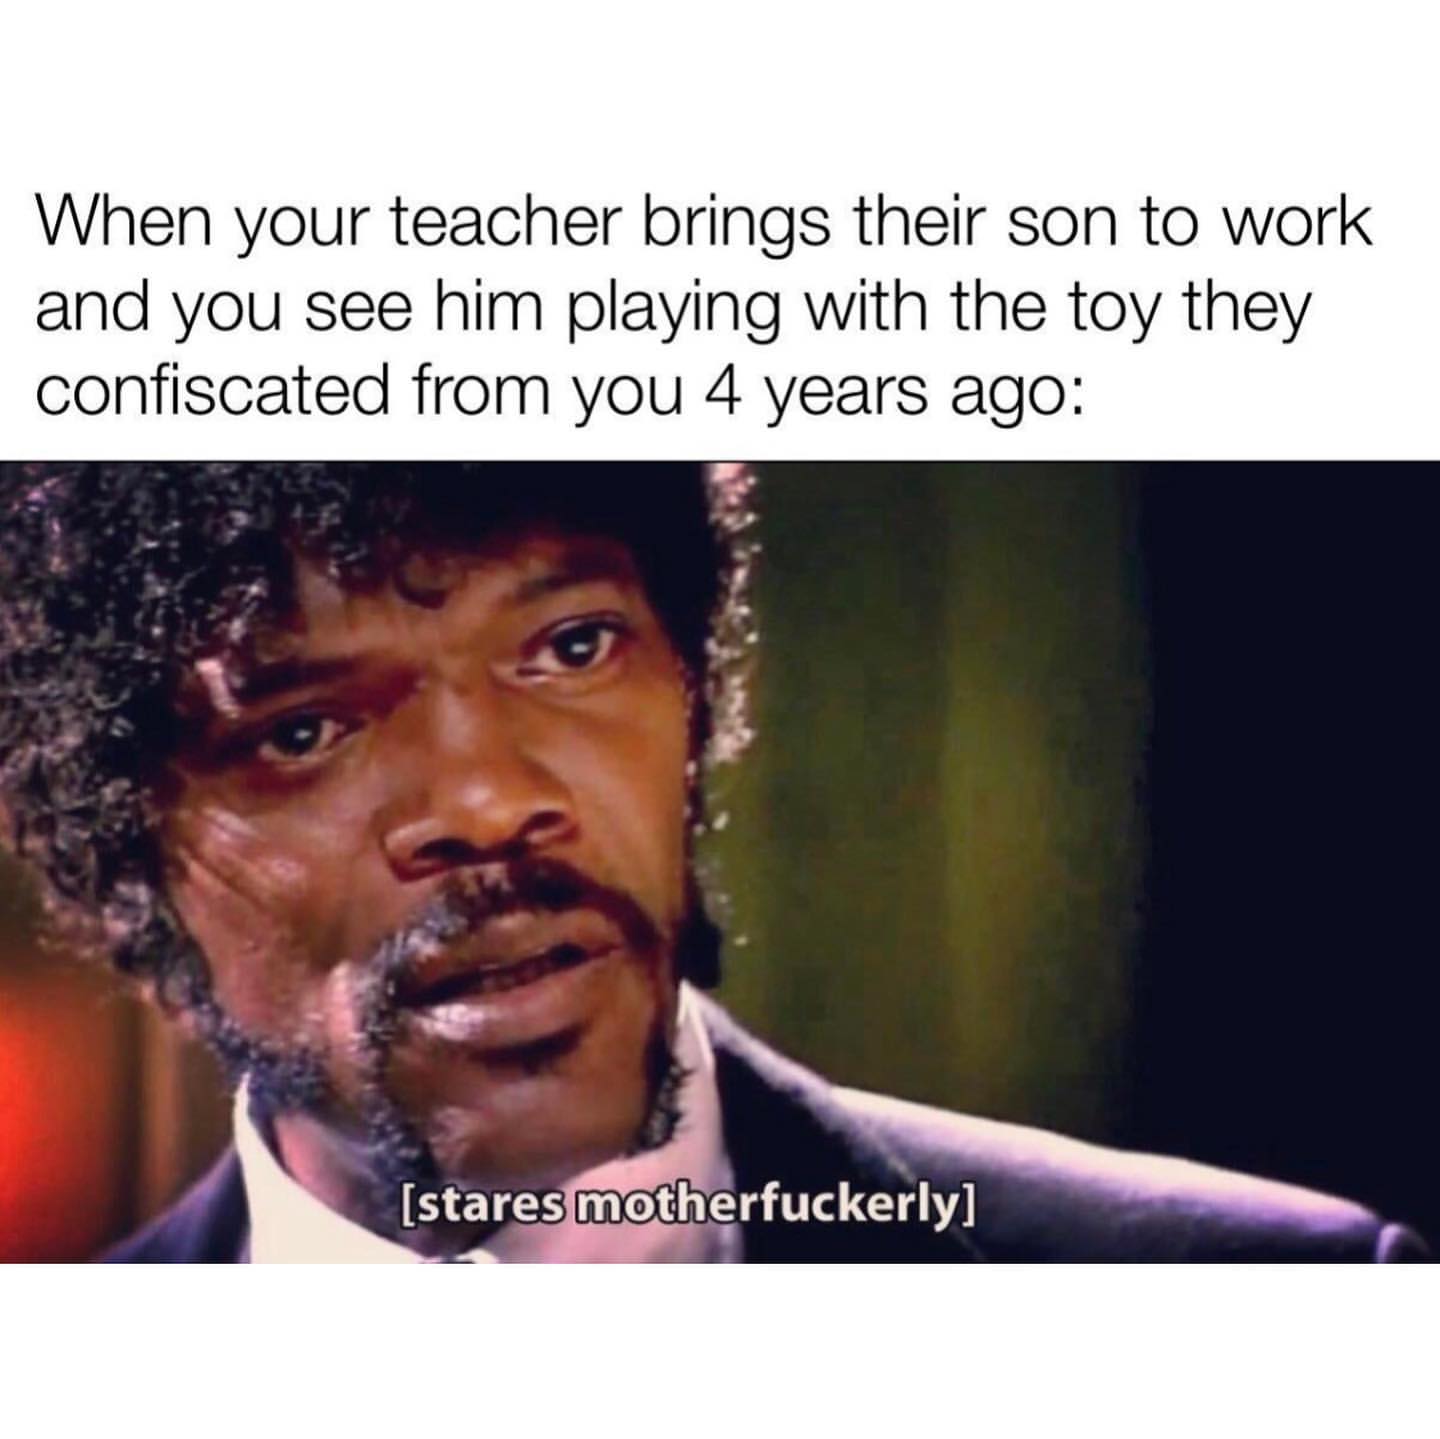 When your teacher brings their son to work and you see him playing with the toy they confiscated from you 4 years ago: (stares motherfuckerly)